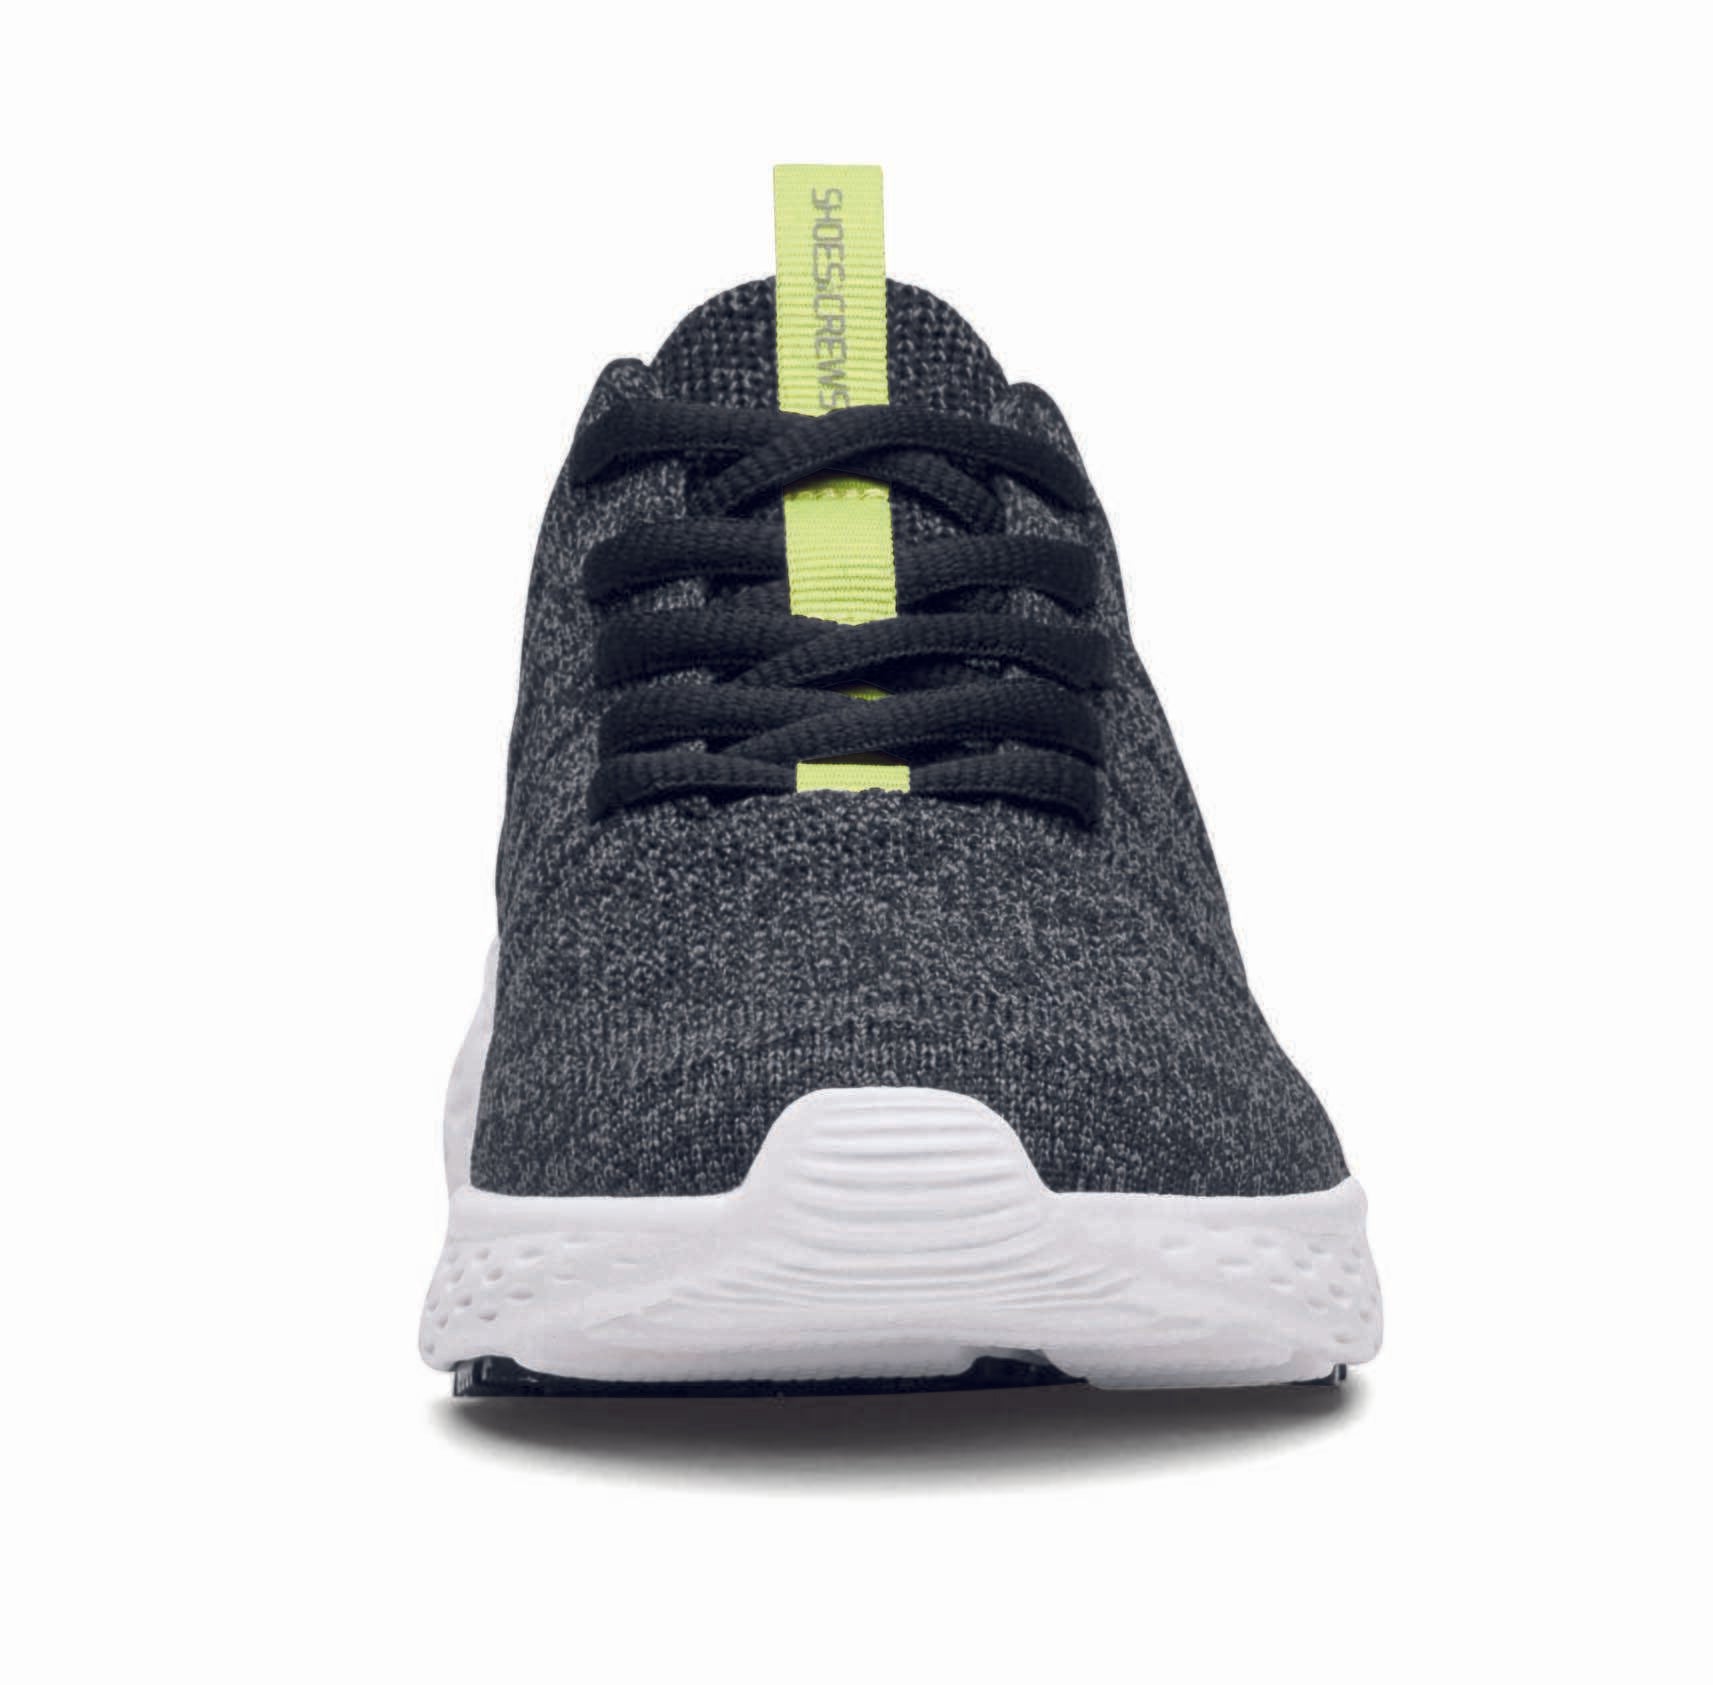 The Everlight™ ECO Mens Black/Grey from Shoes For Crews are slip-resistant, breathable, lightweight trainers made from recycled materials, seen from the front.